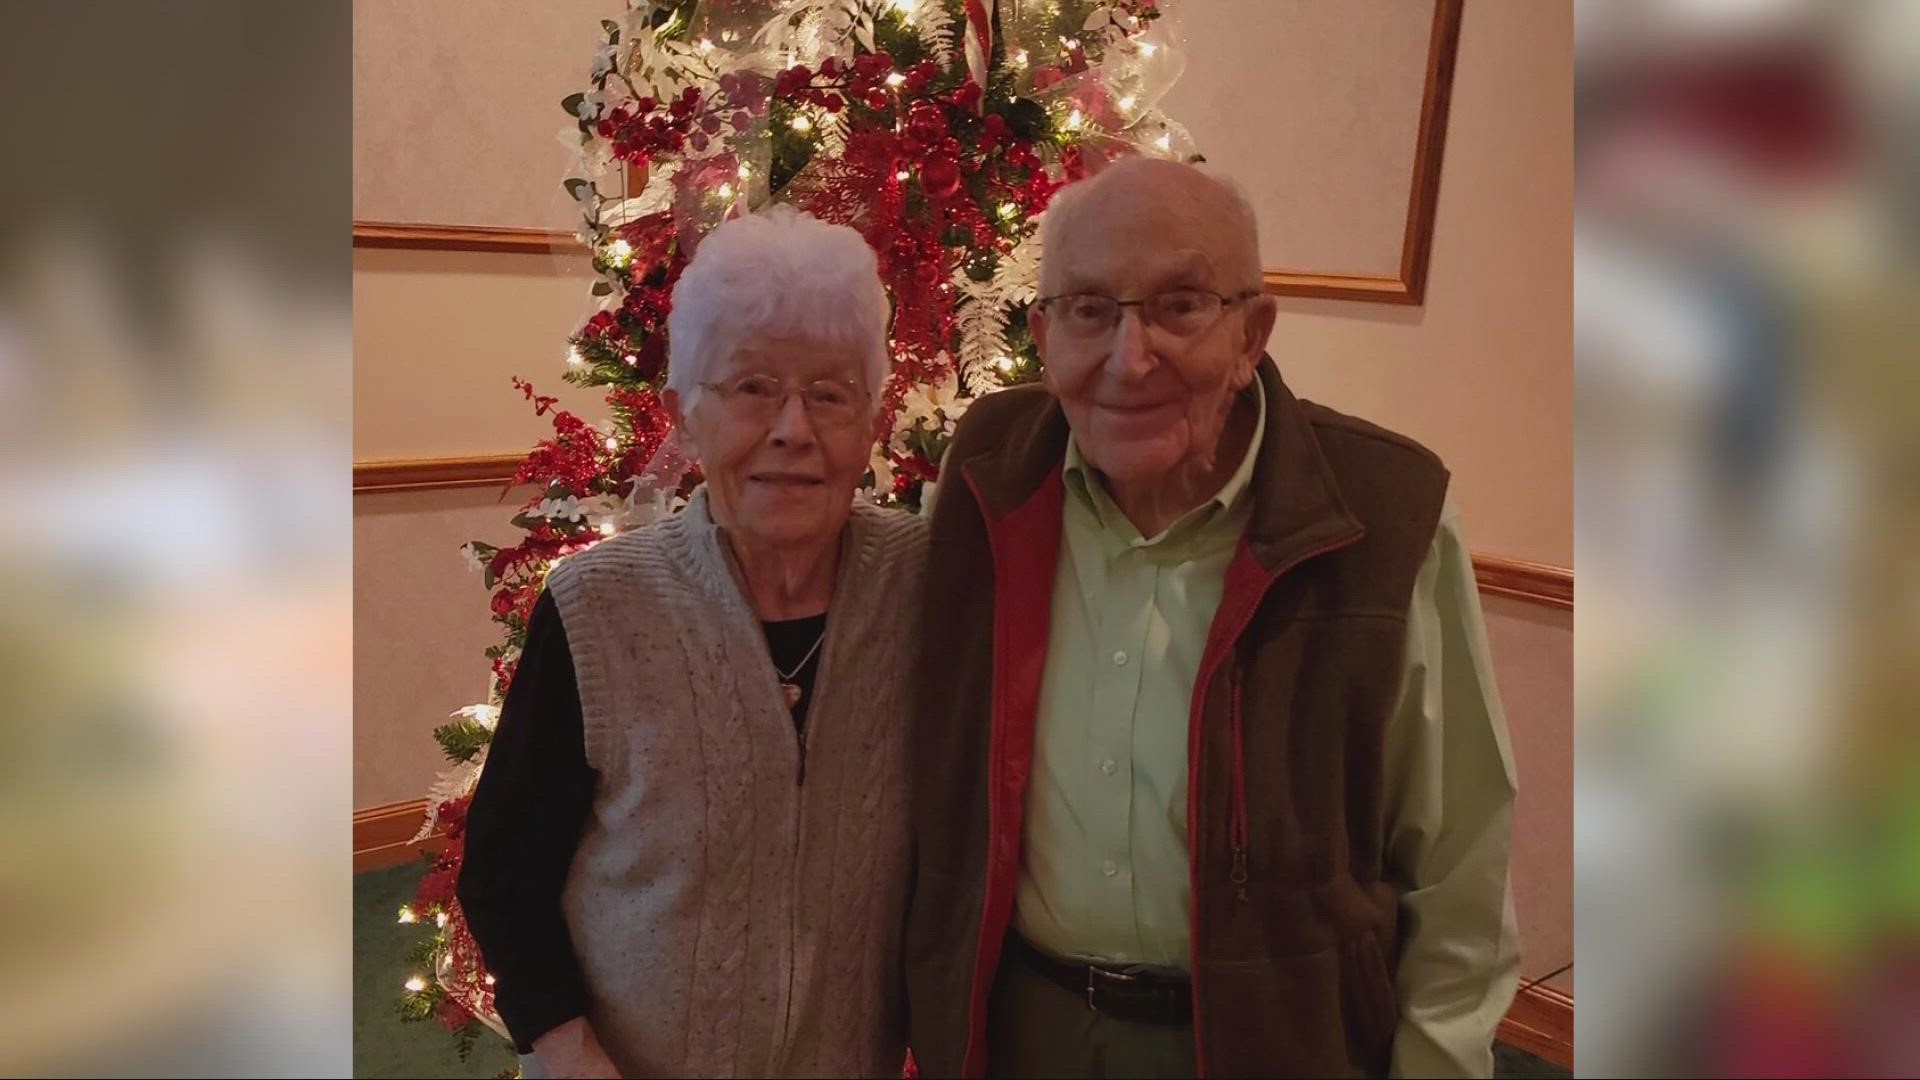 "While we are saddened & this special couple will be missed beyond belief, the Lord has a greater purpose & has called them Home for Christmas."